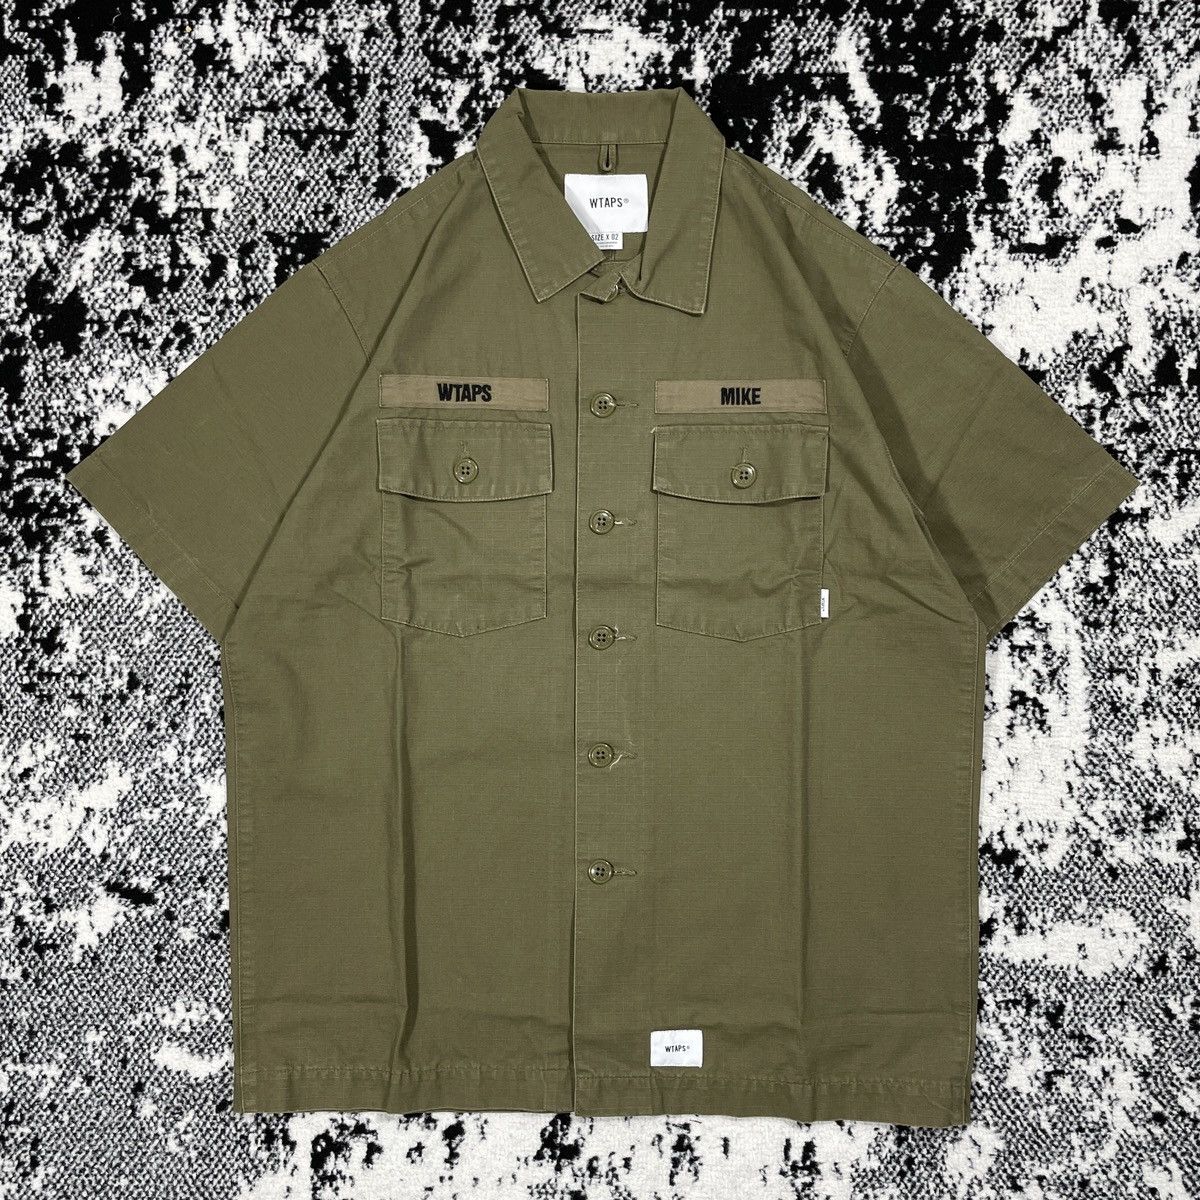 Wtaps WTAPS BUDS SS SHIRT COTTON RIPSTOP 2019 | Grailed